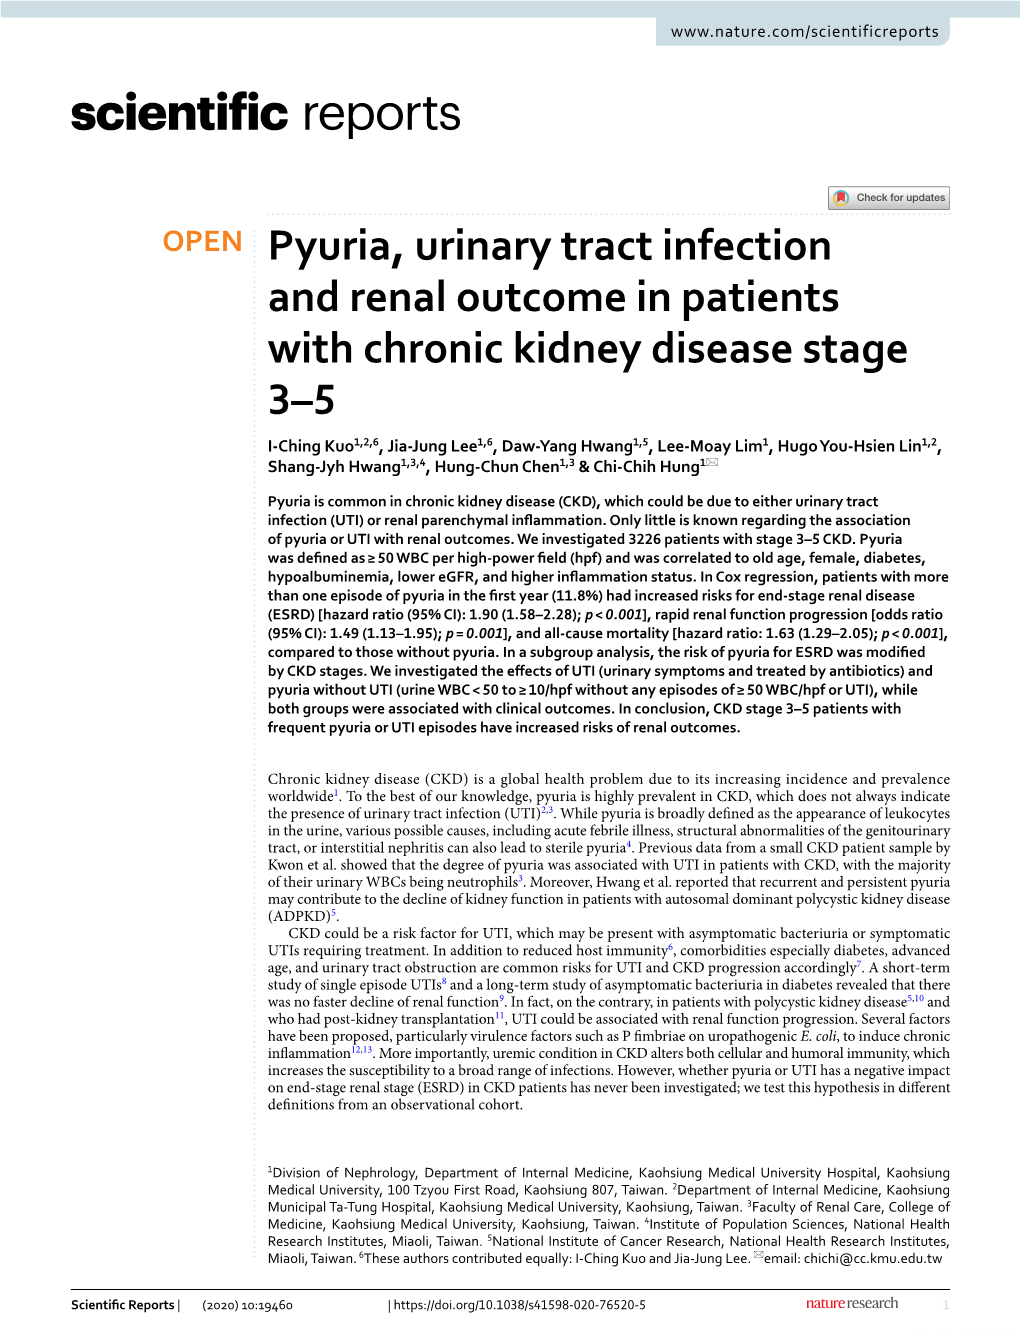 Pyuria, Urinary Tract Infection and Renal Outcome in Patients with Chronic